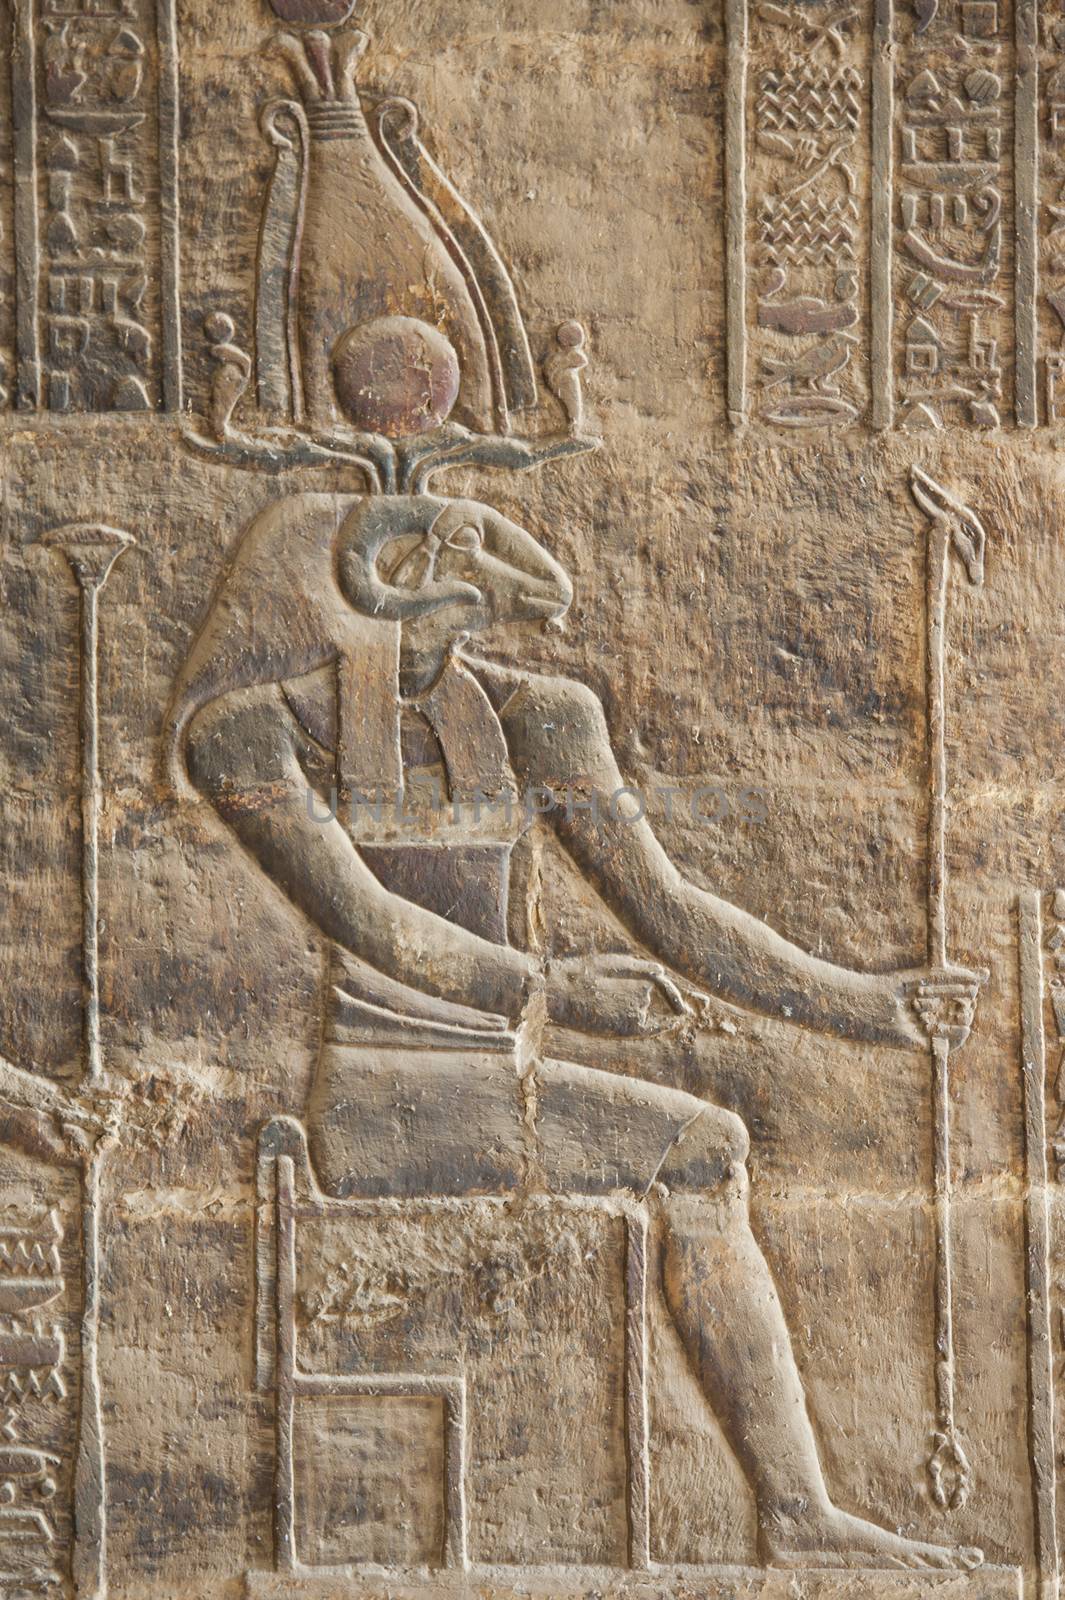 Hieroglyphic carvings on a wall at the Egyptian Temple of Khnum in Esna